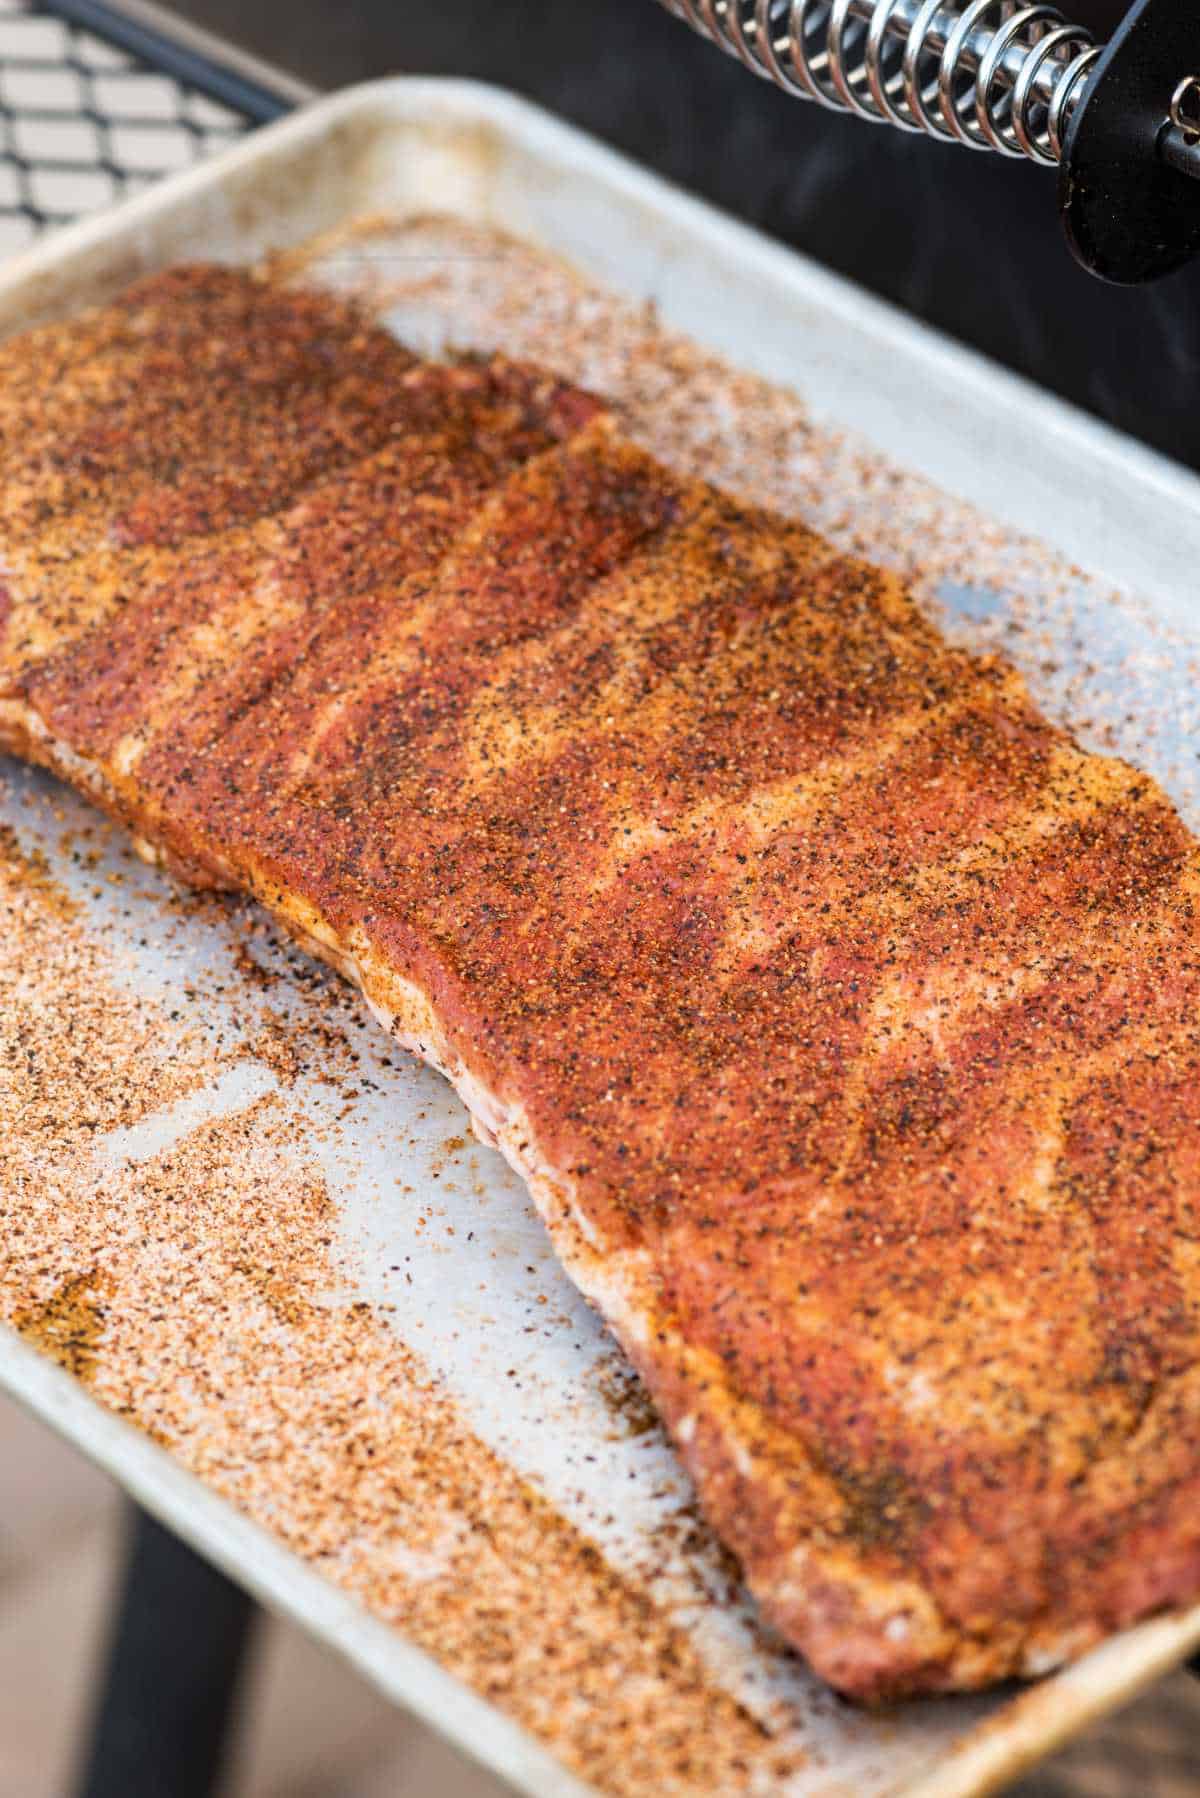 Ribs Rubbed with Seasoning Redy to Grill.